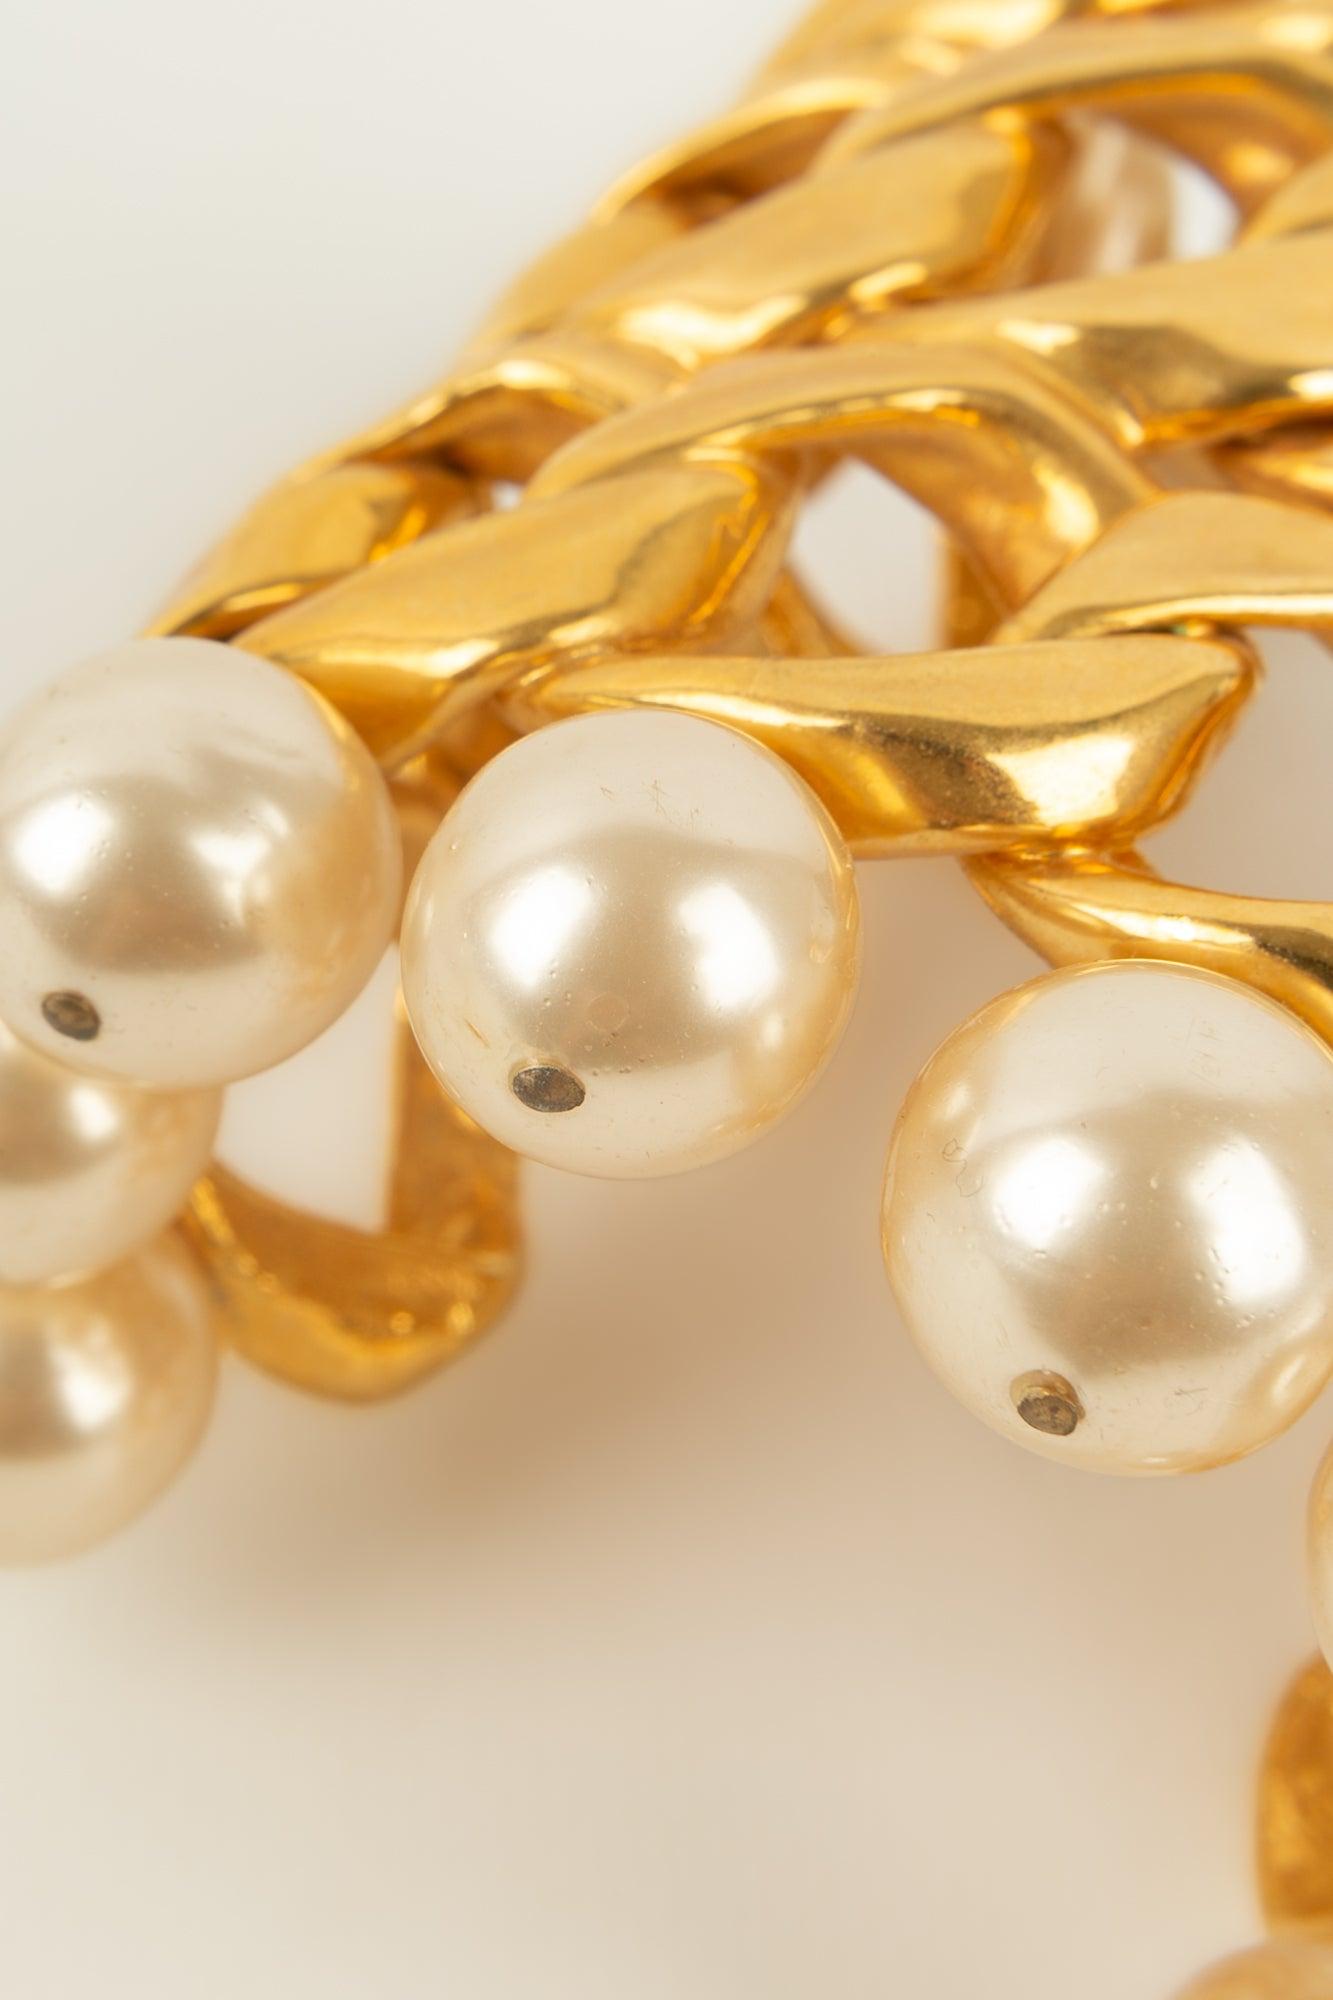 Chanel Cuff Bracelet in Golden Metal, Costume Pearls, and Pearly Drops For Sale 2